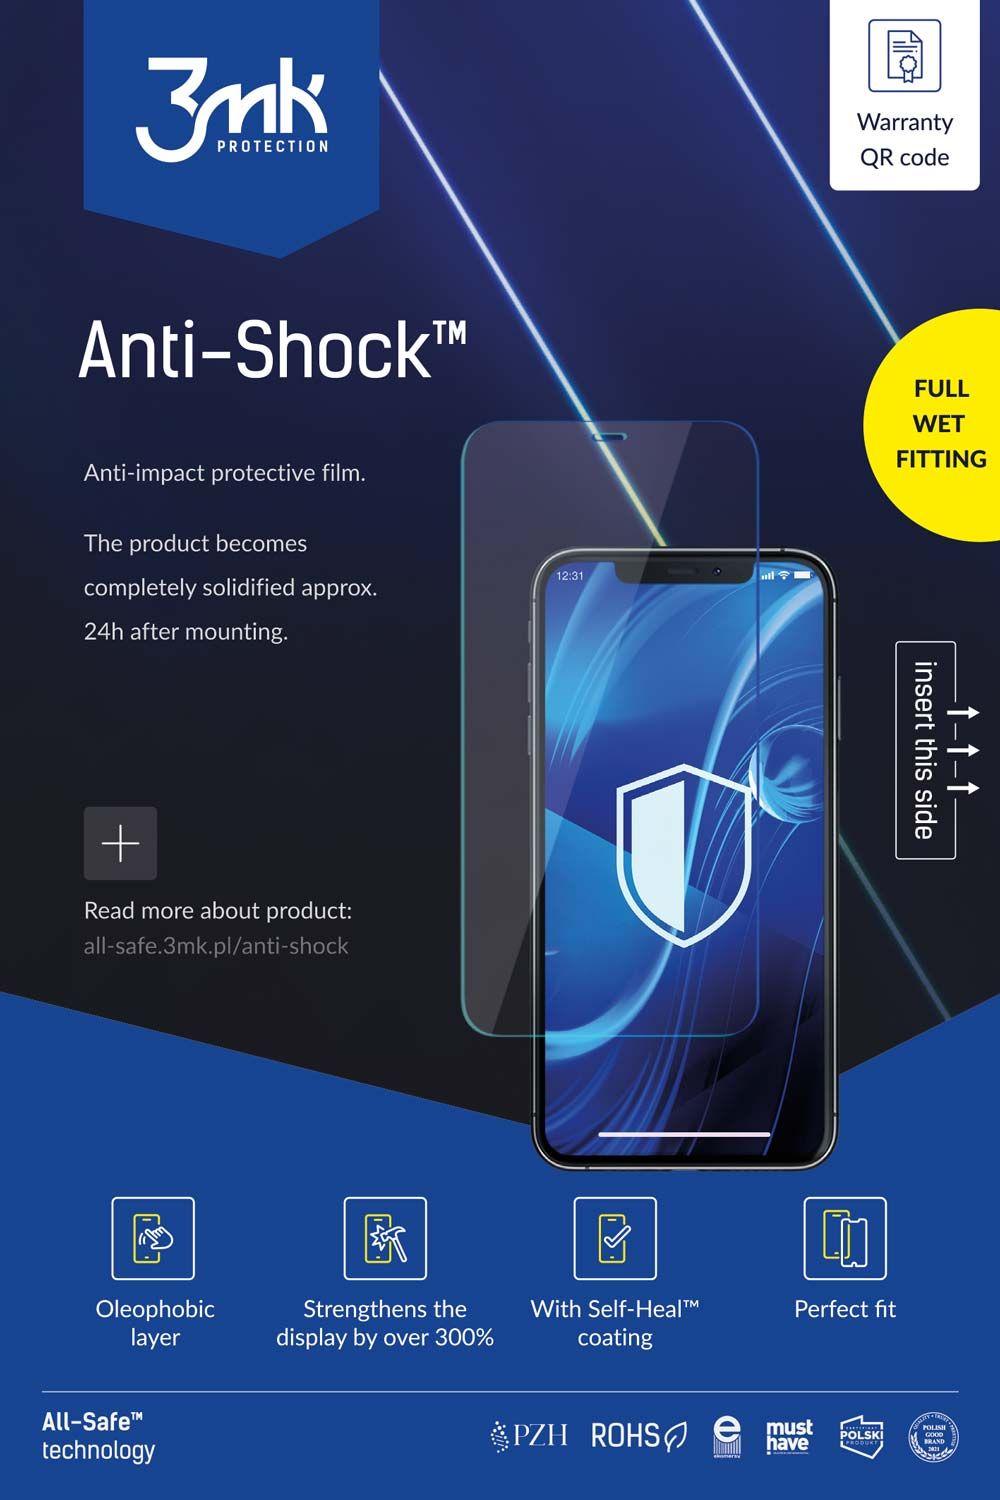 Protective films 3mk All-Safe - AIO Anti-Shock Phone Full Wet Fittting 5 pcs (only compatible with the new plotter)